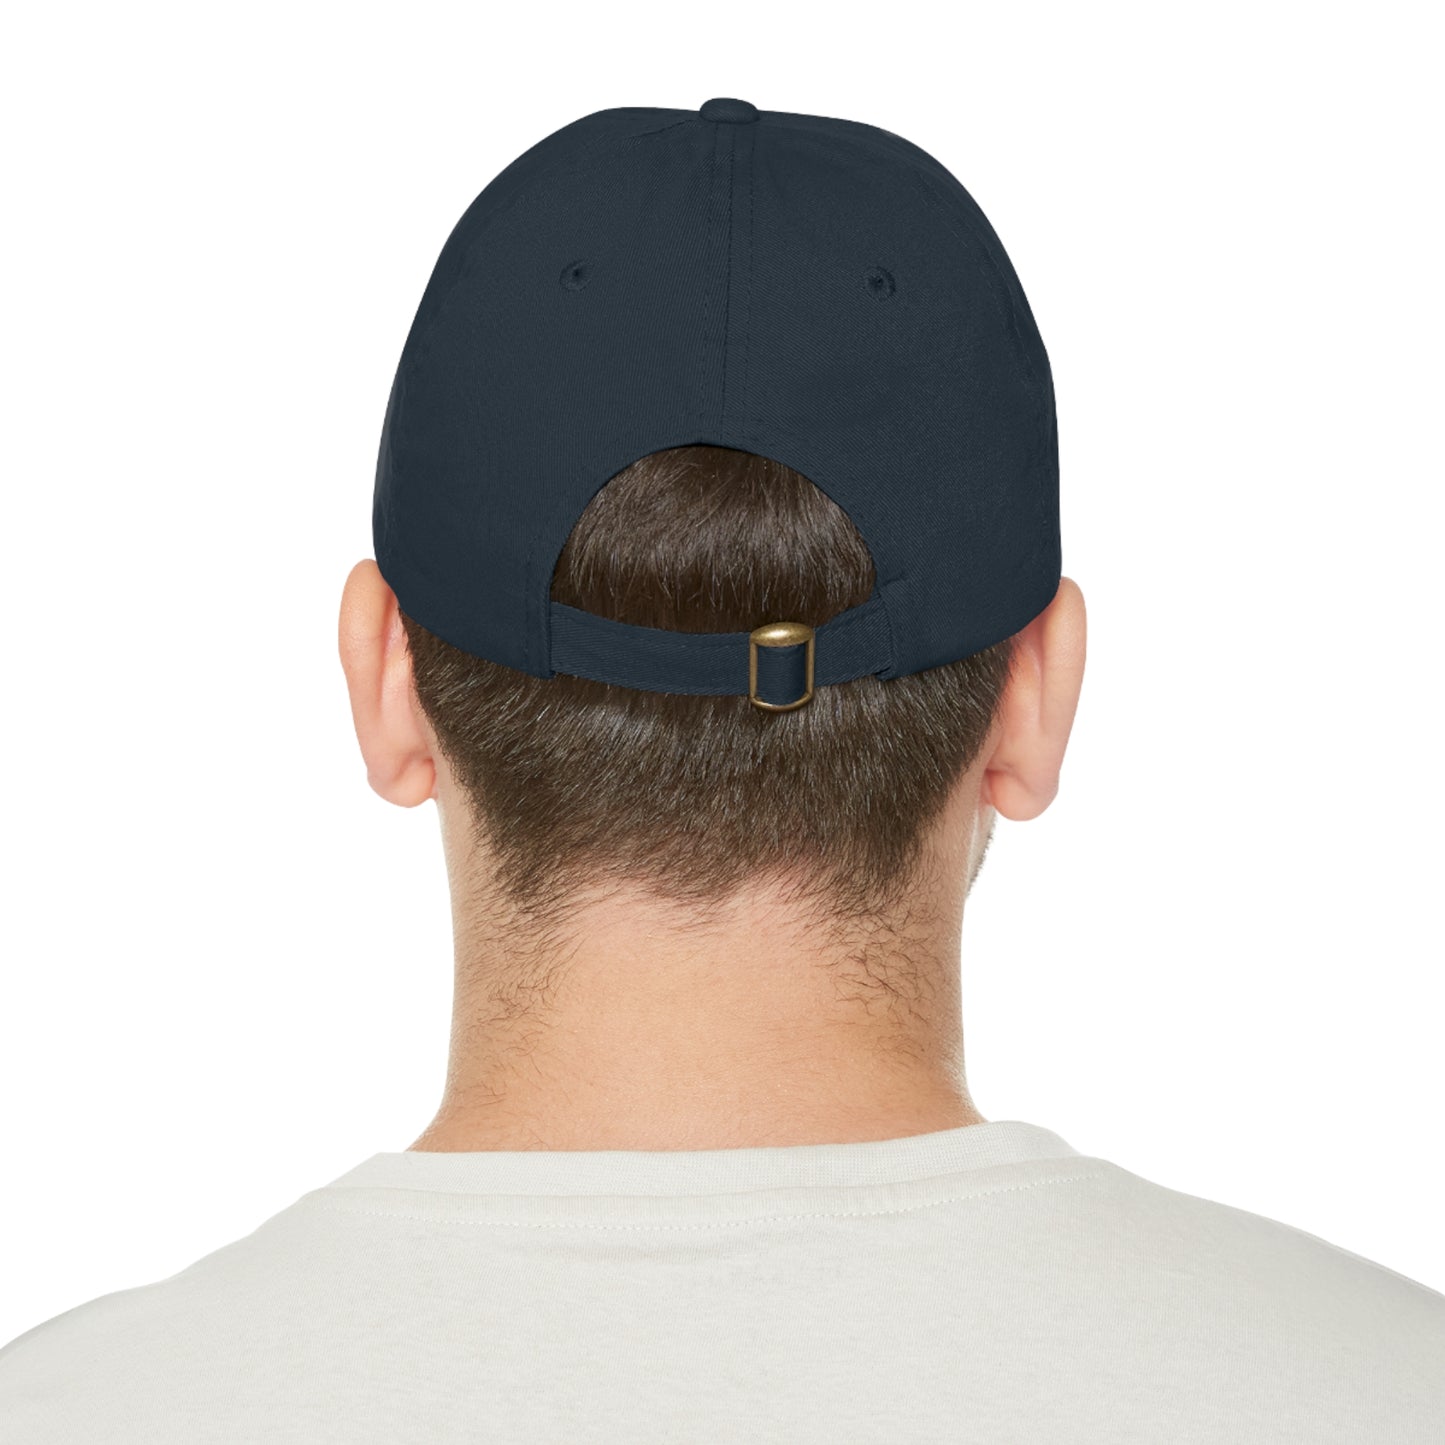 Courthouse Art Deco 2 Dad Hat